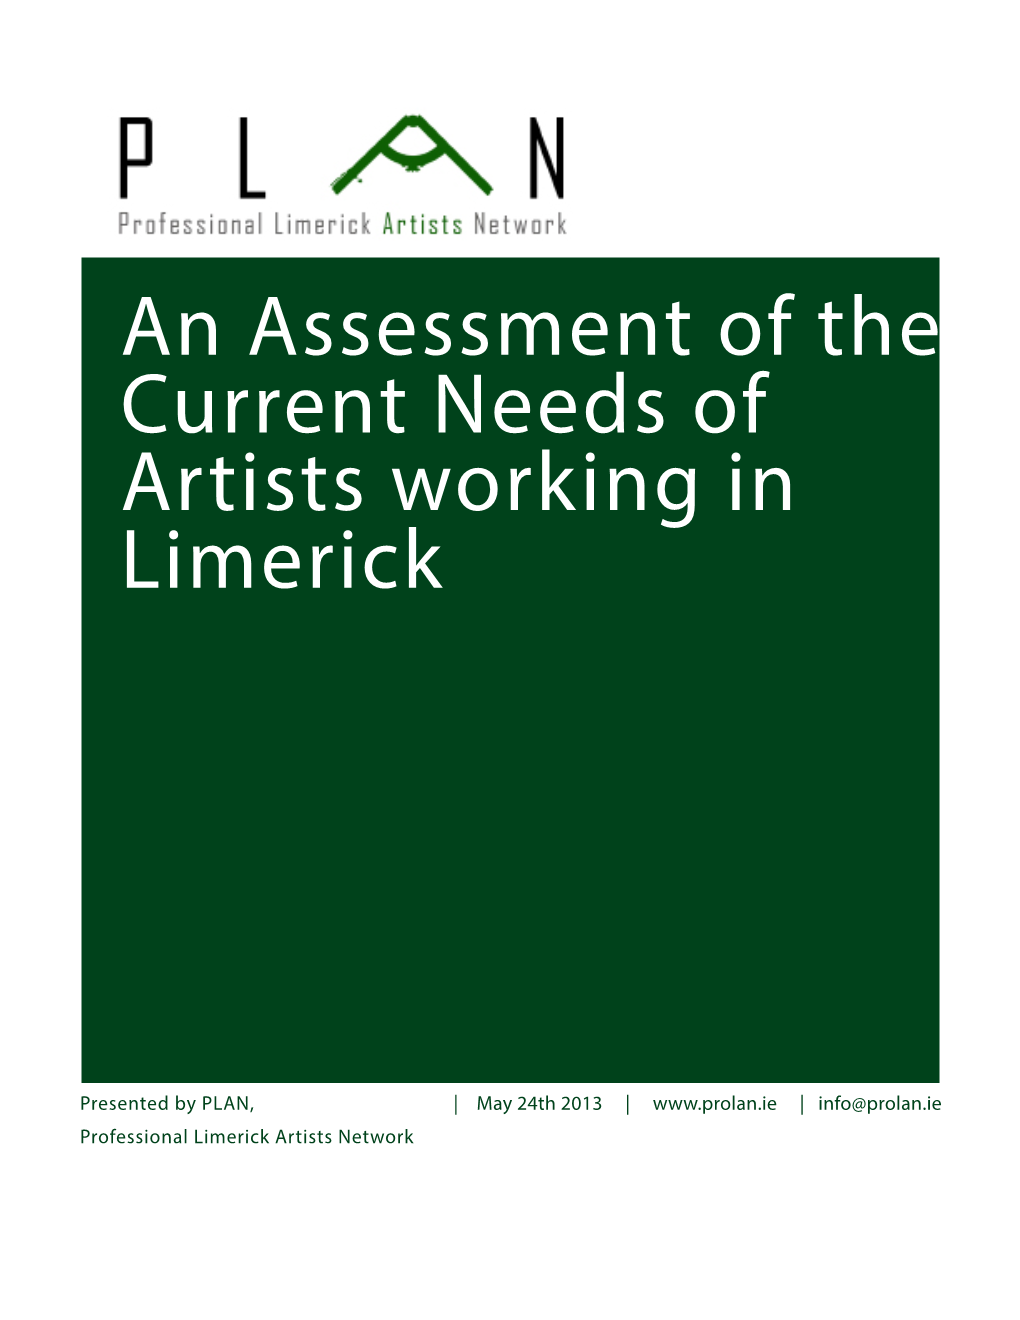 An Assessment of the Current Needs of Artists Working in Limerick